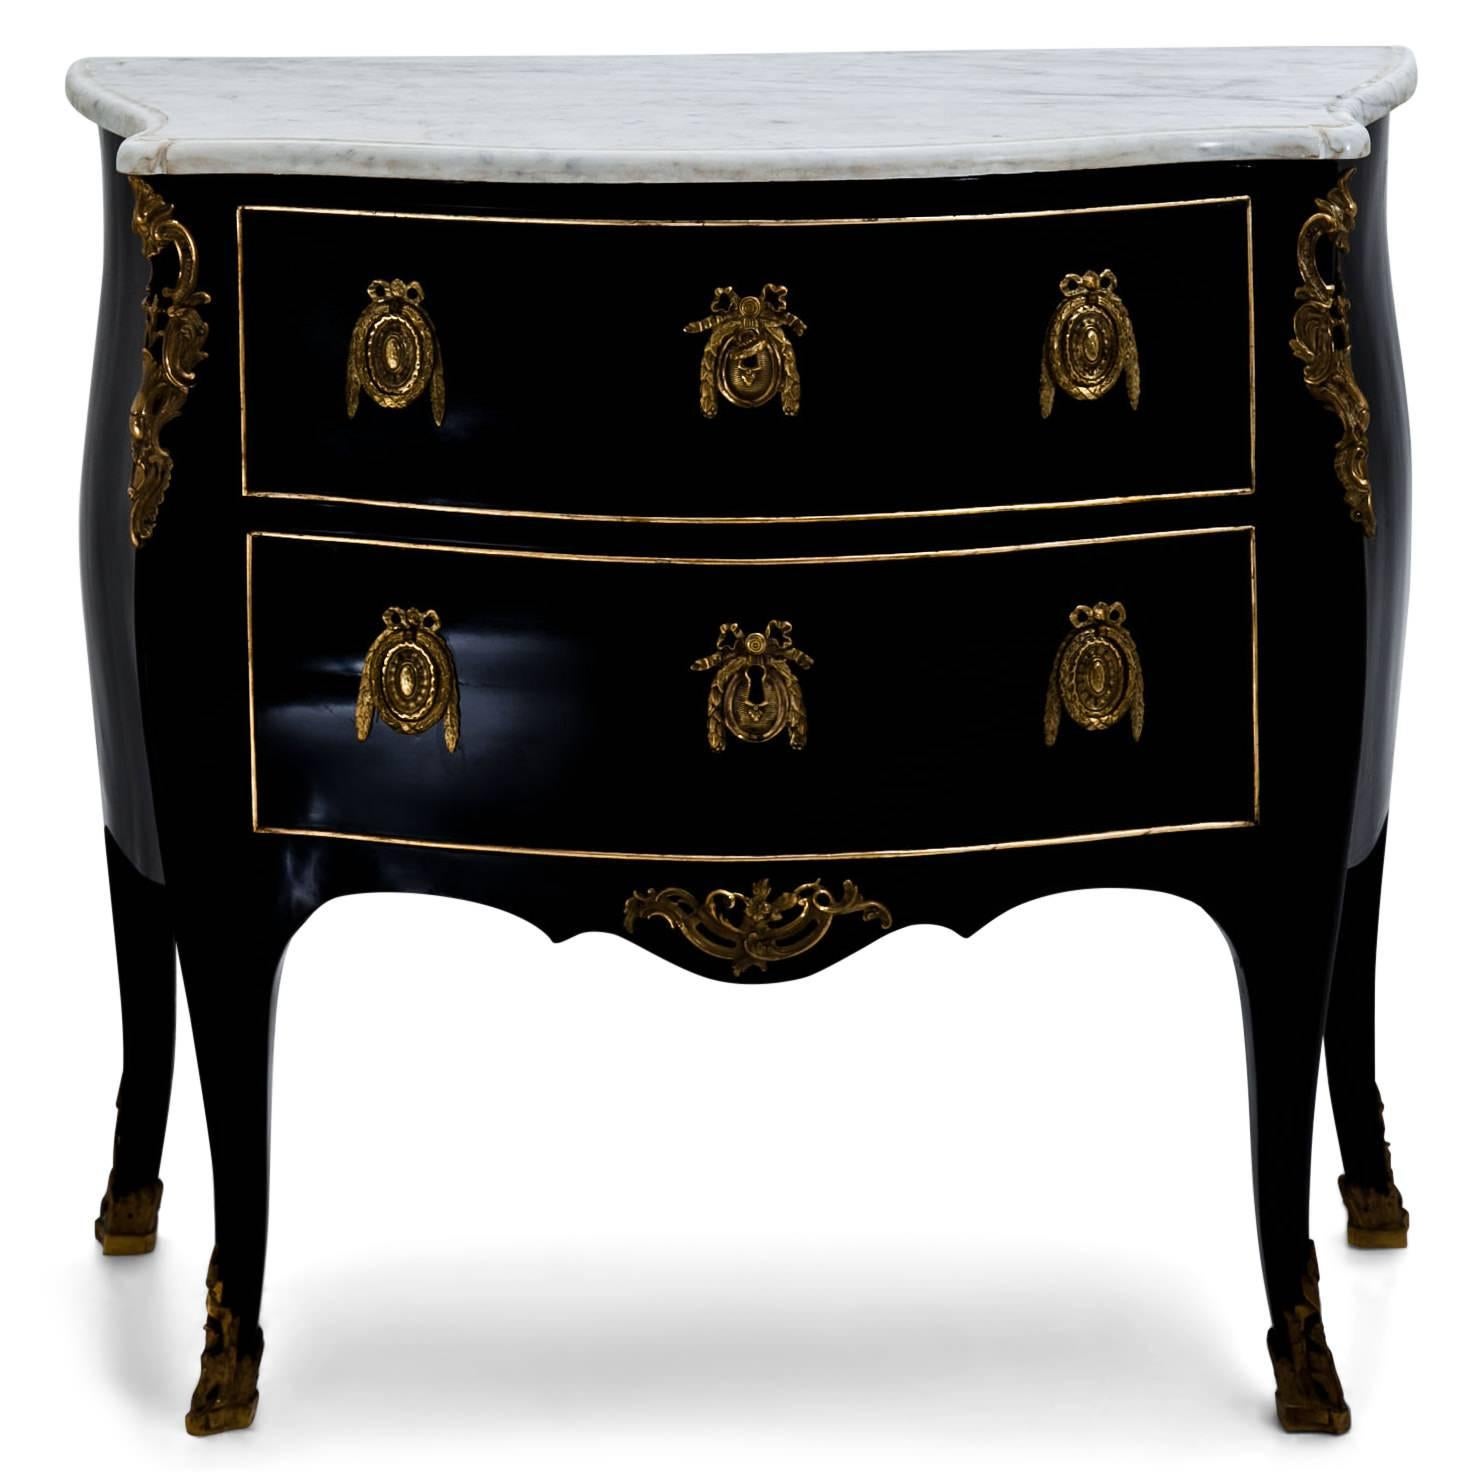 Two-drawered Louis Quinze chest of drawers with an ebonized trapezoidal body and white marble top as well as bronze fittings. The chest was later ebonized.